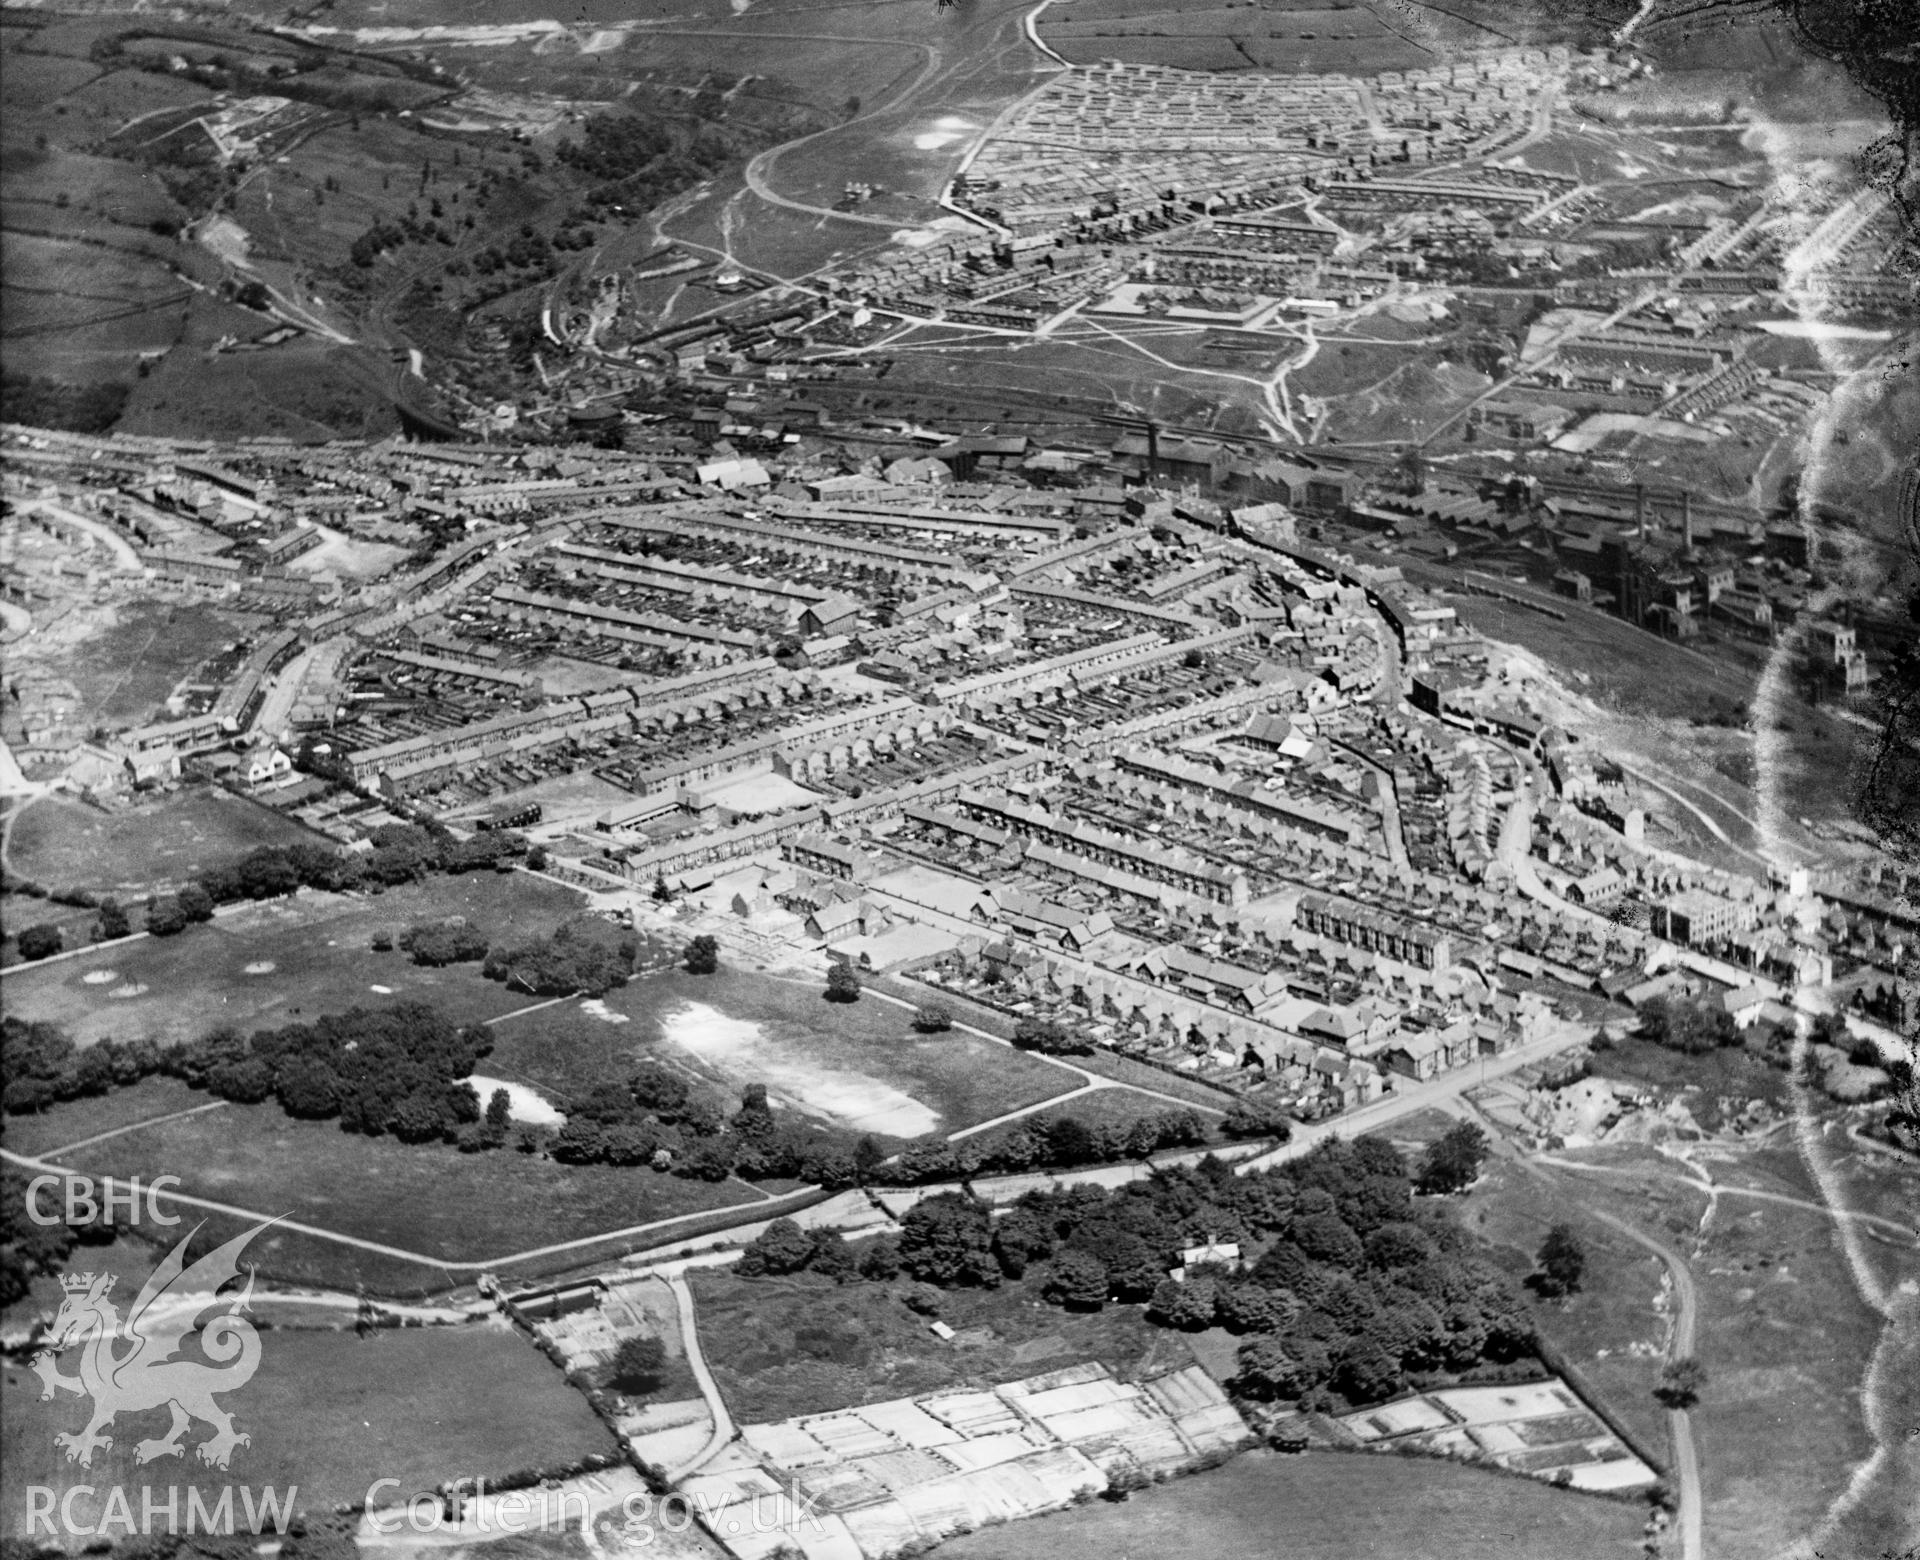 View of new housing at Aberbargoed, oblique aerial view. 5?x4? black and white glass plate negative.